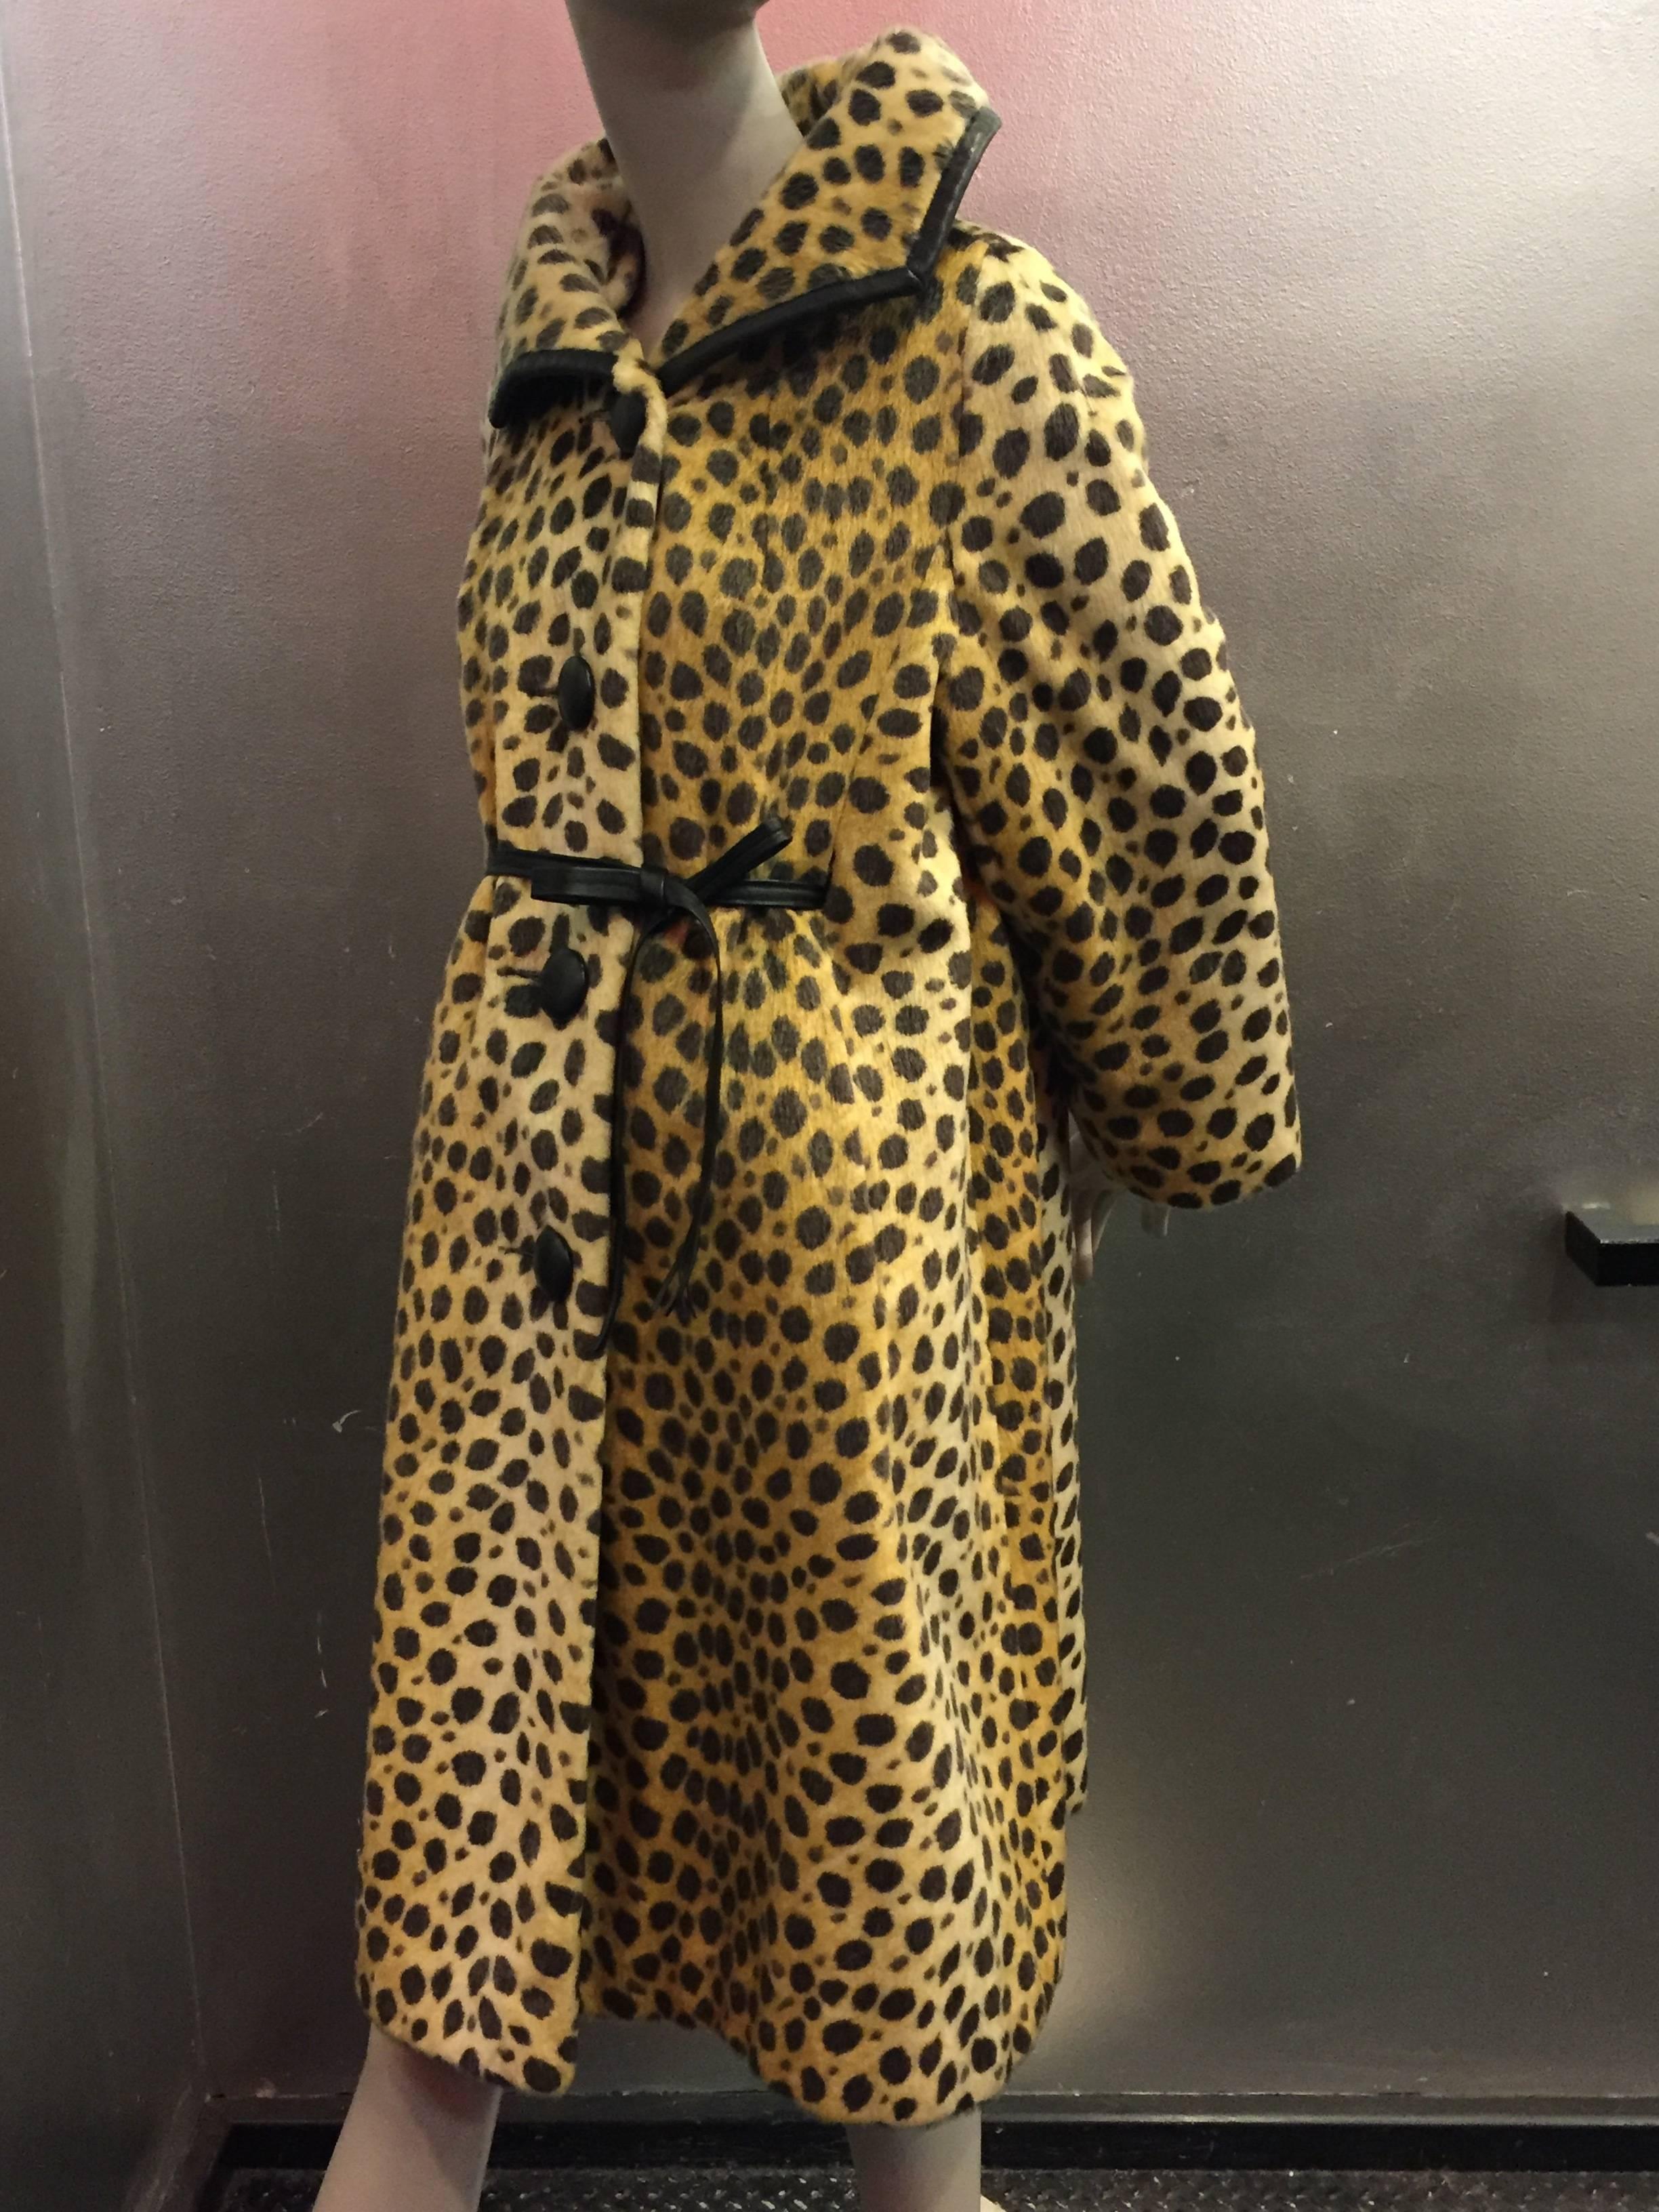 1960s Modela faux fur jaguar print swing coat with leather trim, buttons and front tie. Side slit pockets. Full lining. 